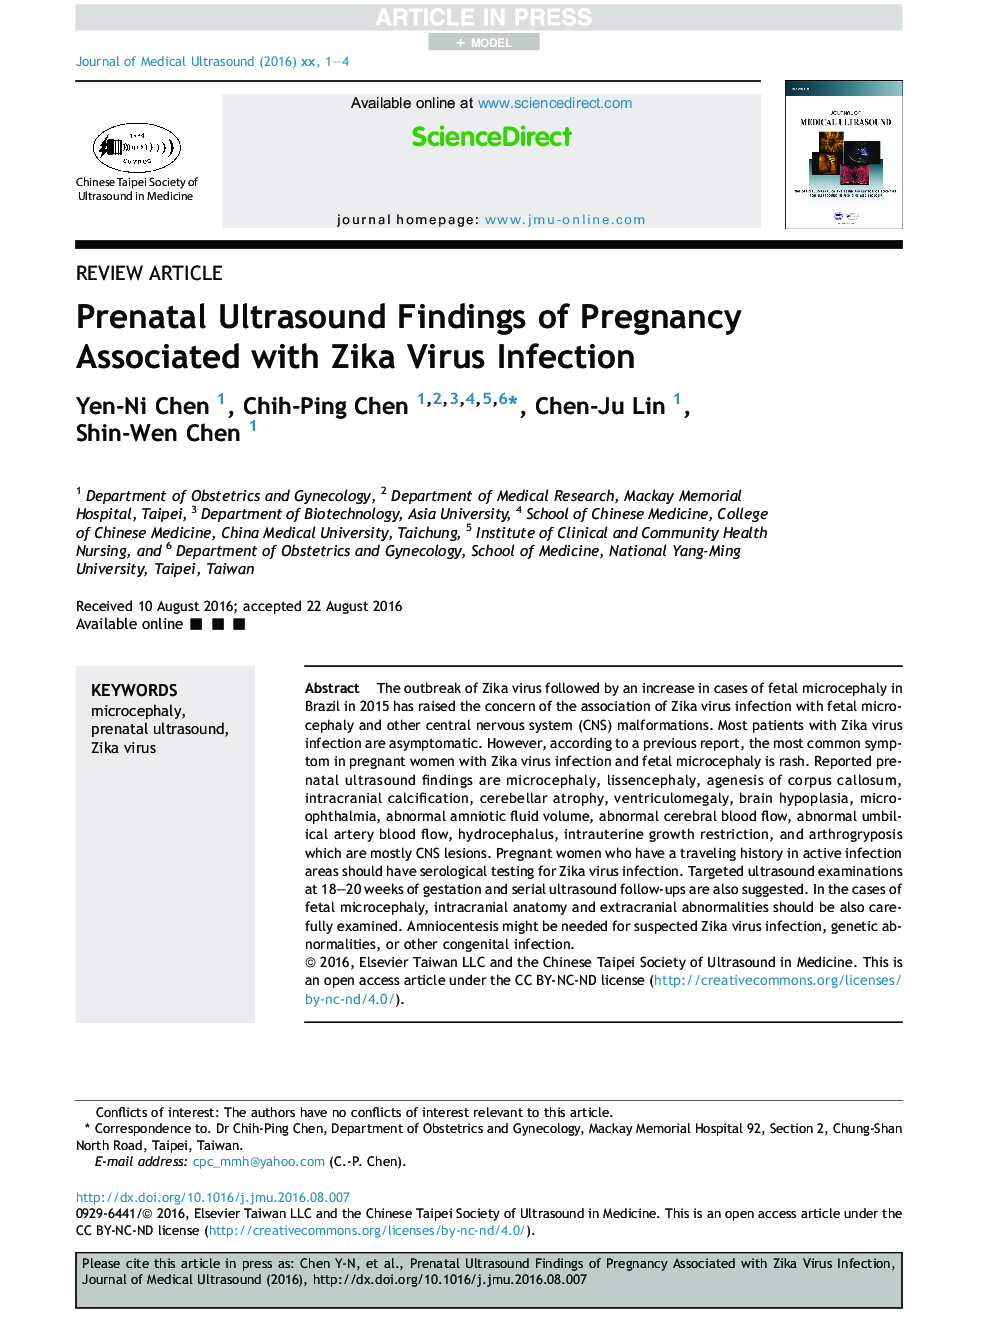 Prenatal Ultrasound Findings of Pregnancy Associated with Zika Virus Infection